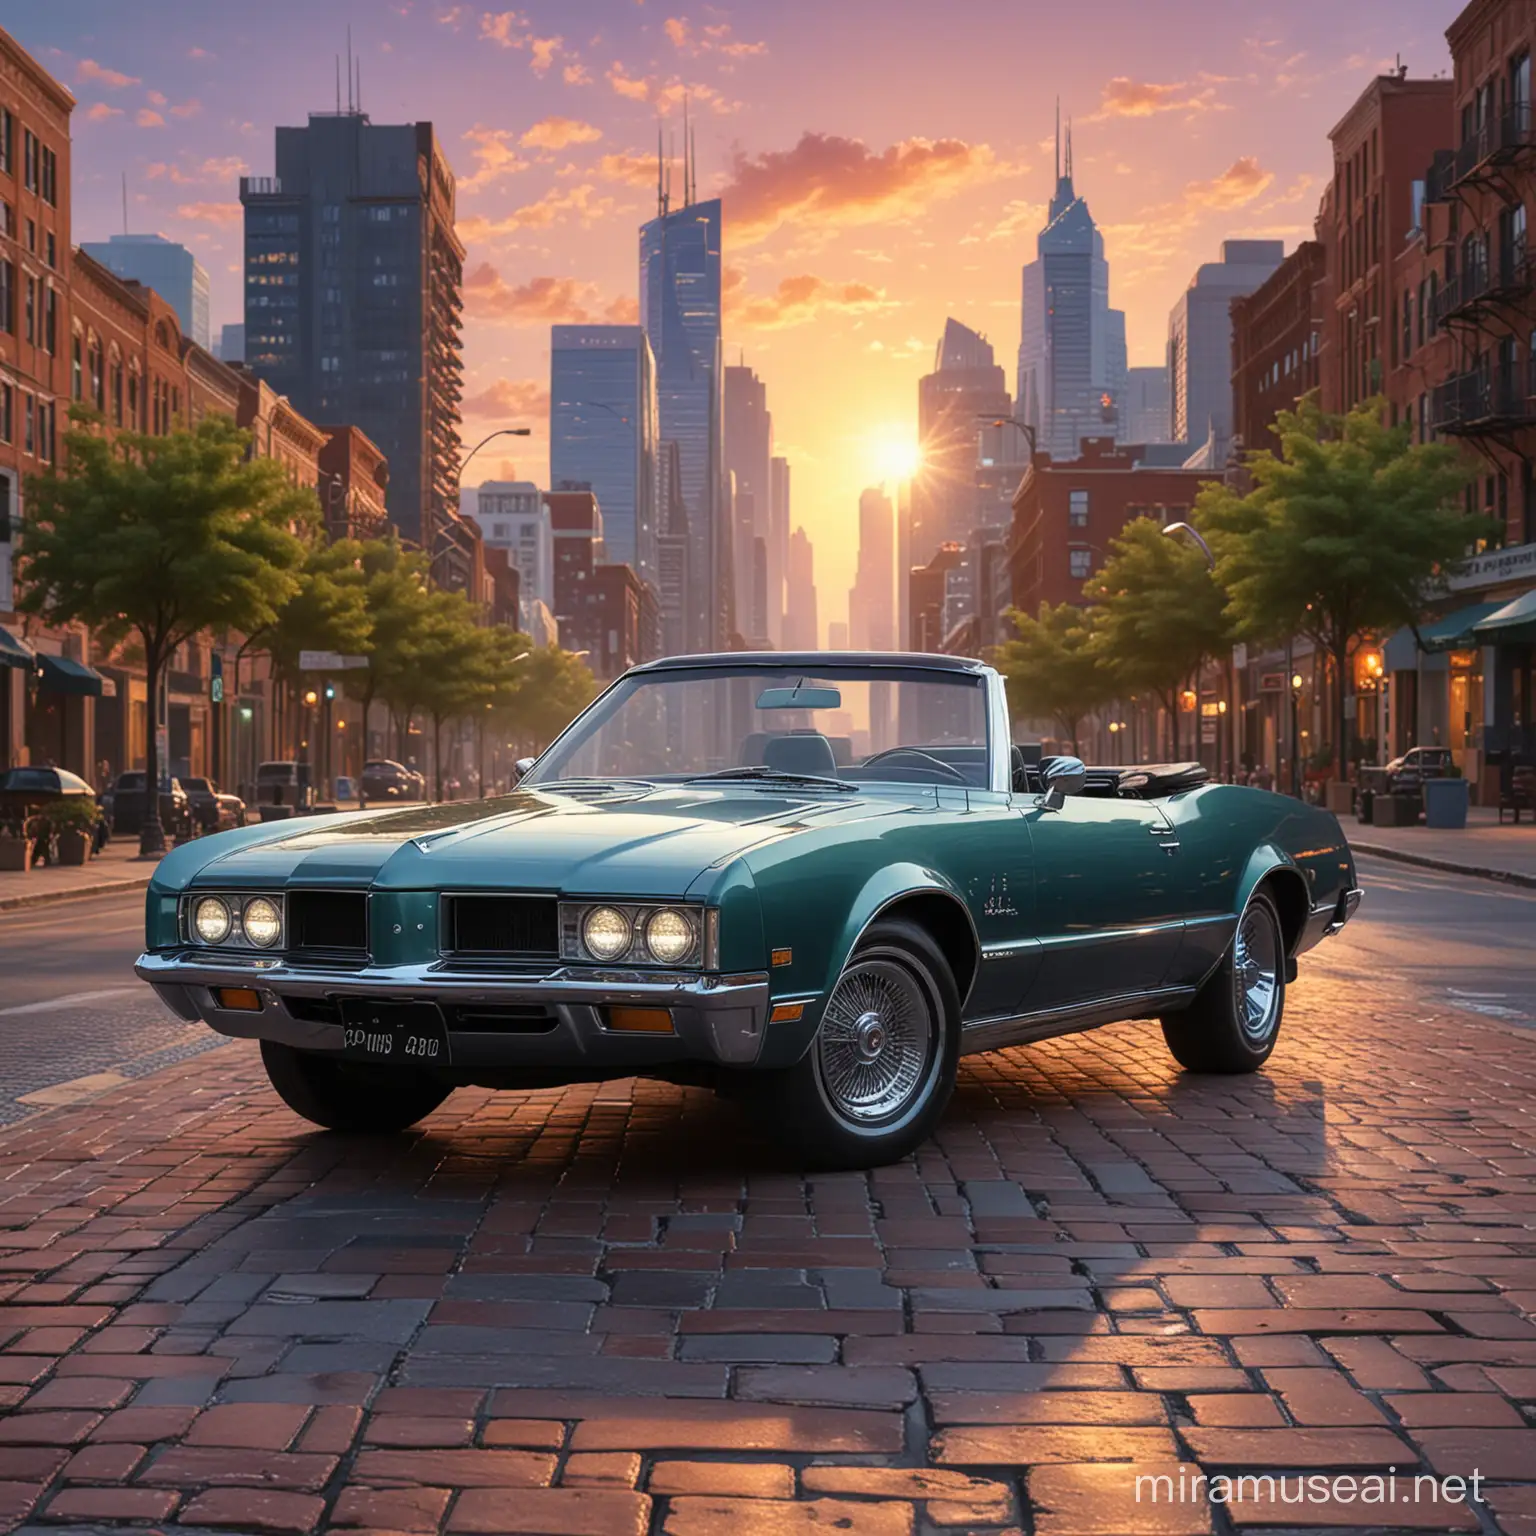 The image shows a body of water with a city in the background, featuring a skyline with skyscrapers. The scene also includes trees, a park, and a colorful sky during either sunrise or sunset.1966 Oldsmobile Toronado,The image consists of a black sports car parked on a brick road. It is a luxurious supercar with its distinct design elements visible.ALEXANDRITE CATS EYE,Jewelry,  Necklace, Rings and earrings.Black woman beautiful face is shown.  The woman's body parts such as chest, thigh, stomach, and abdomen are visible.painterly smooth, extremely sharp detail, finely tuned detail, 8 k, ultra sharp focus, illustration, illustration, art by Ayami Kojima Beautiful Thick Black